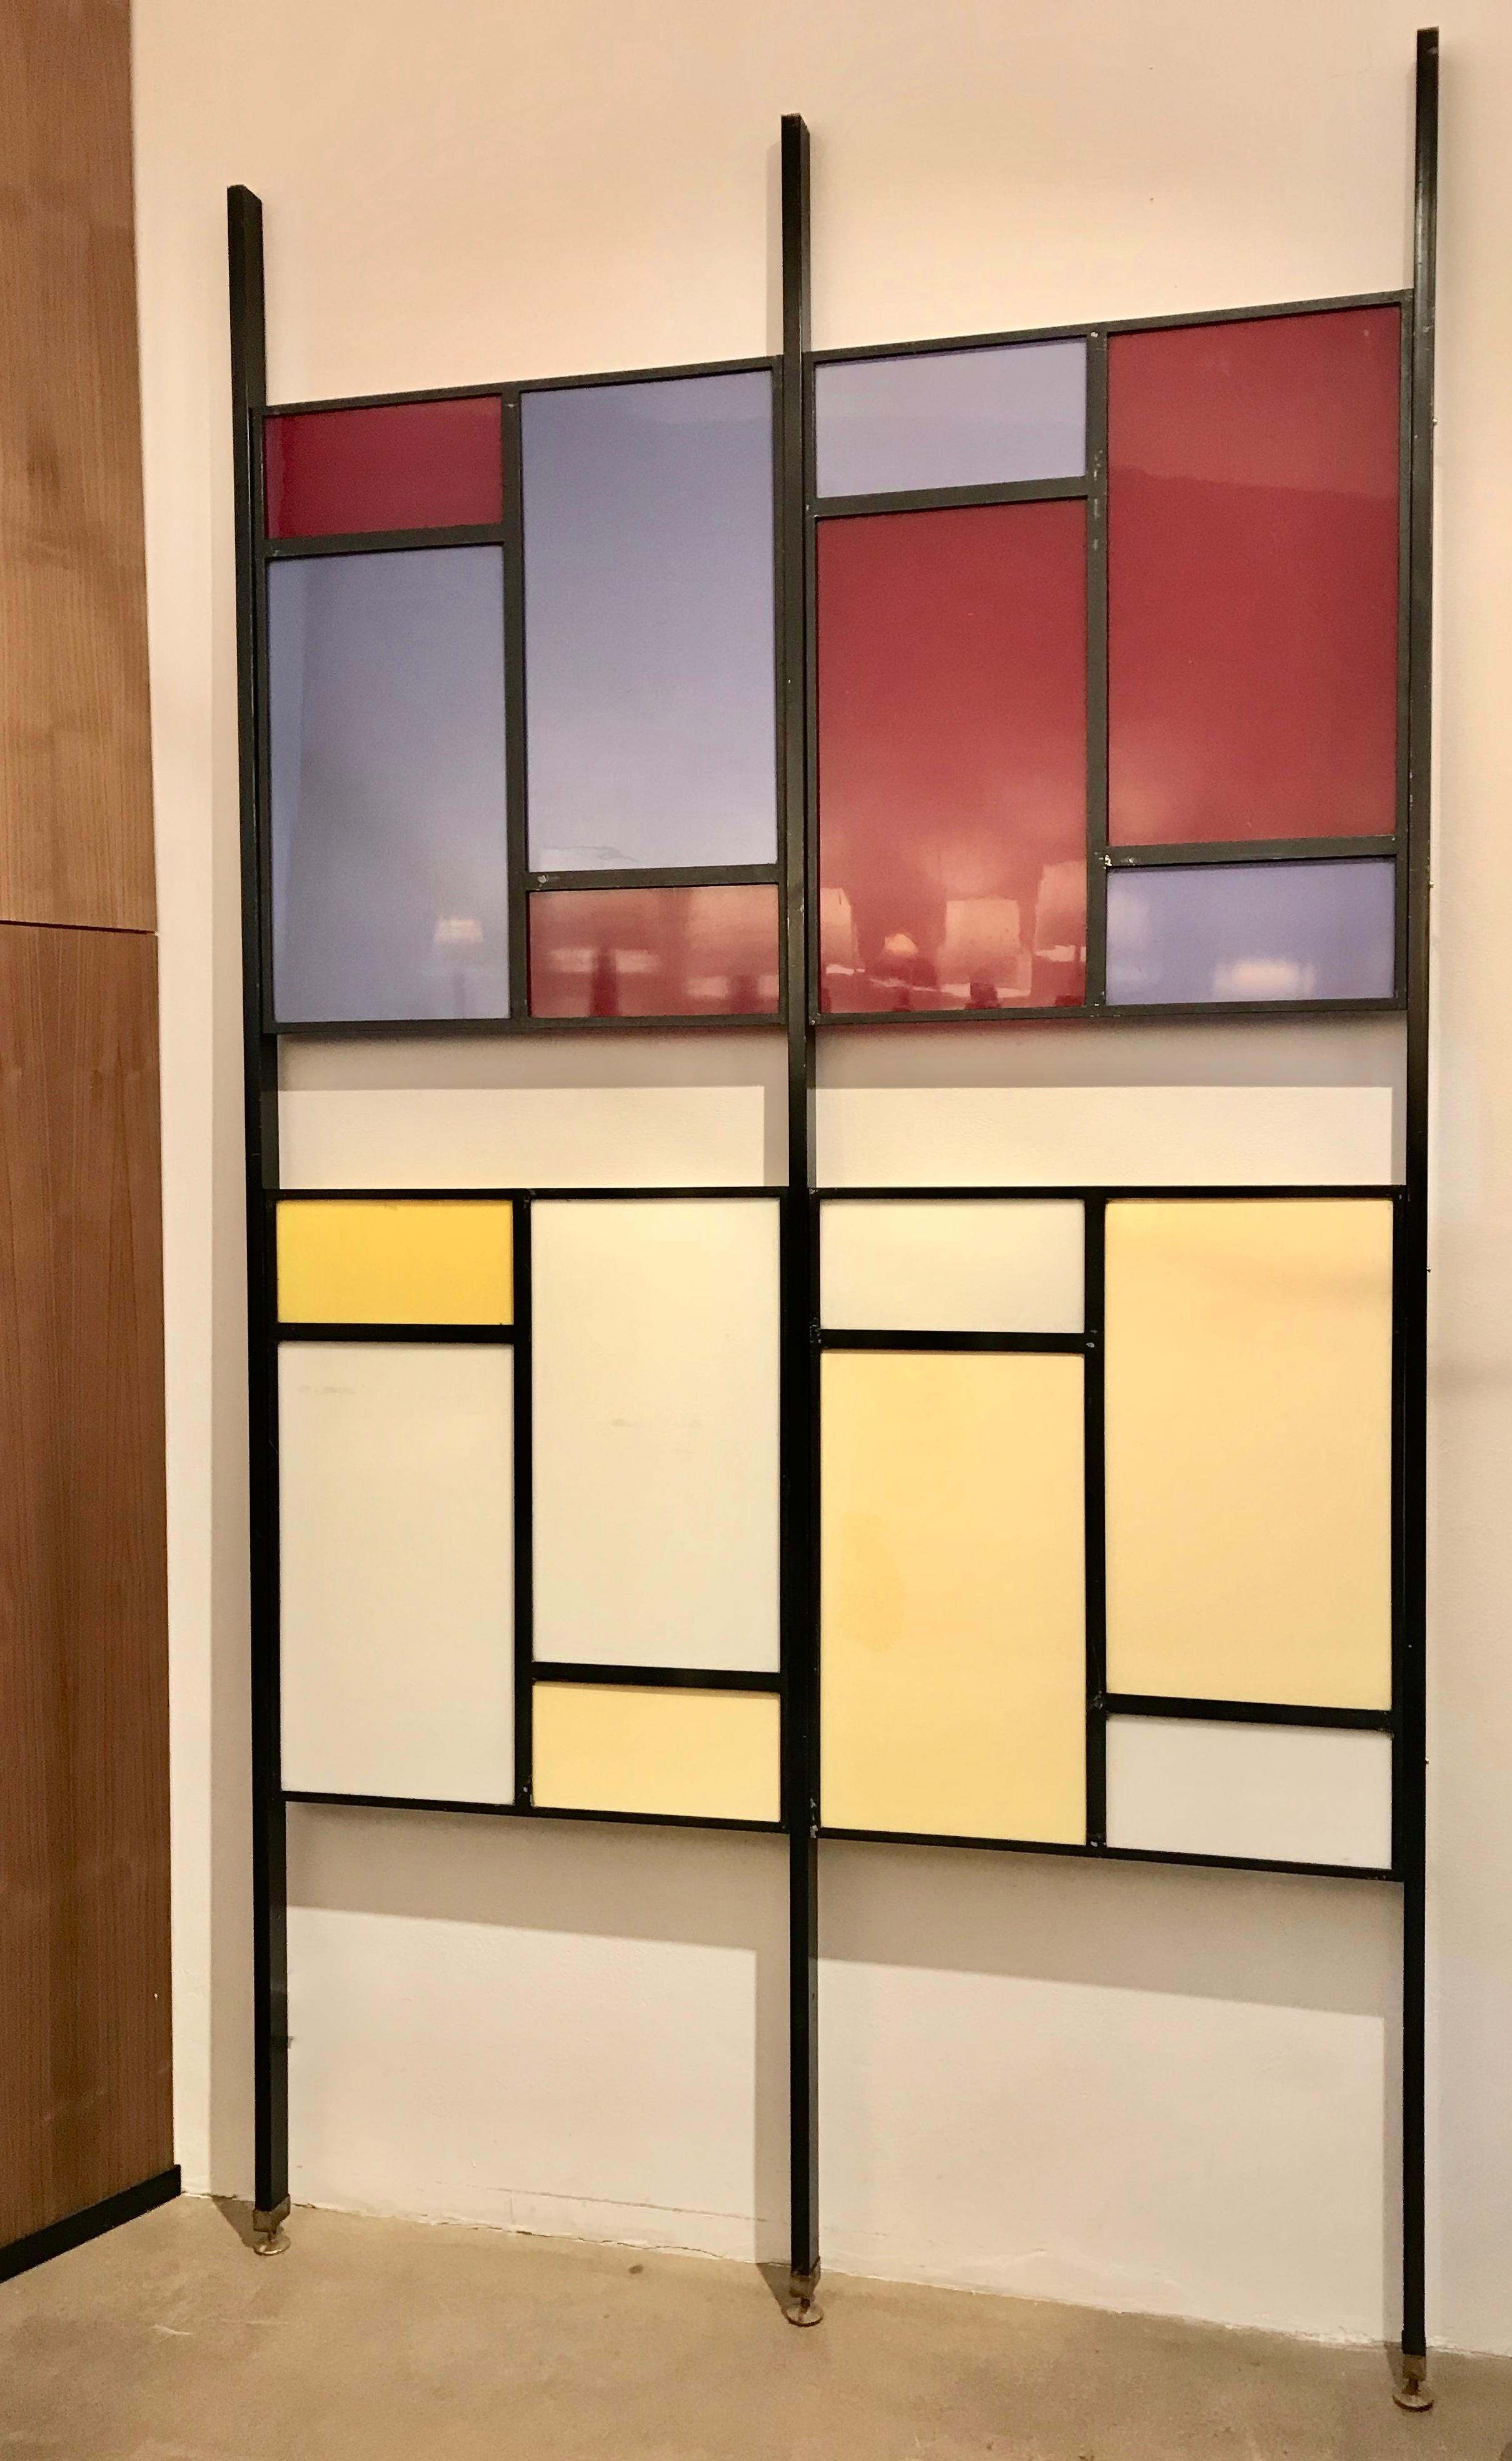 Colourful Mid-Century Modern Italian Partition Wall or Room Divider
Partition wall or room divider consisting of three poles made of lacquered metal and four geometric elements made of lacquered metal and Perspex in white, yellow, red and purple